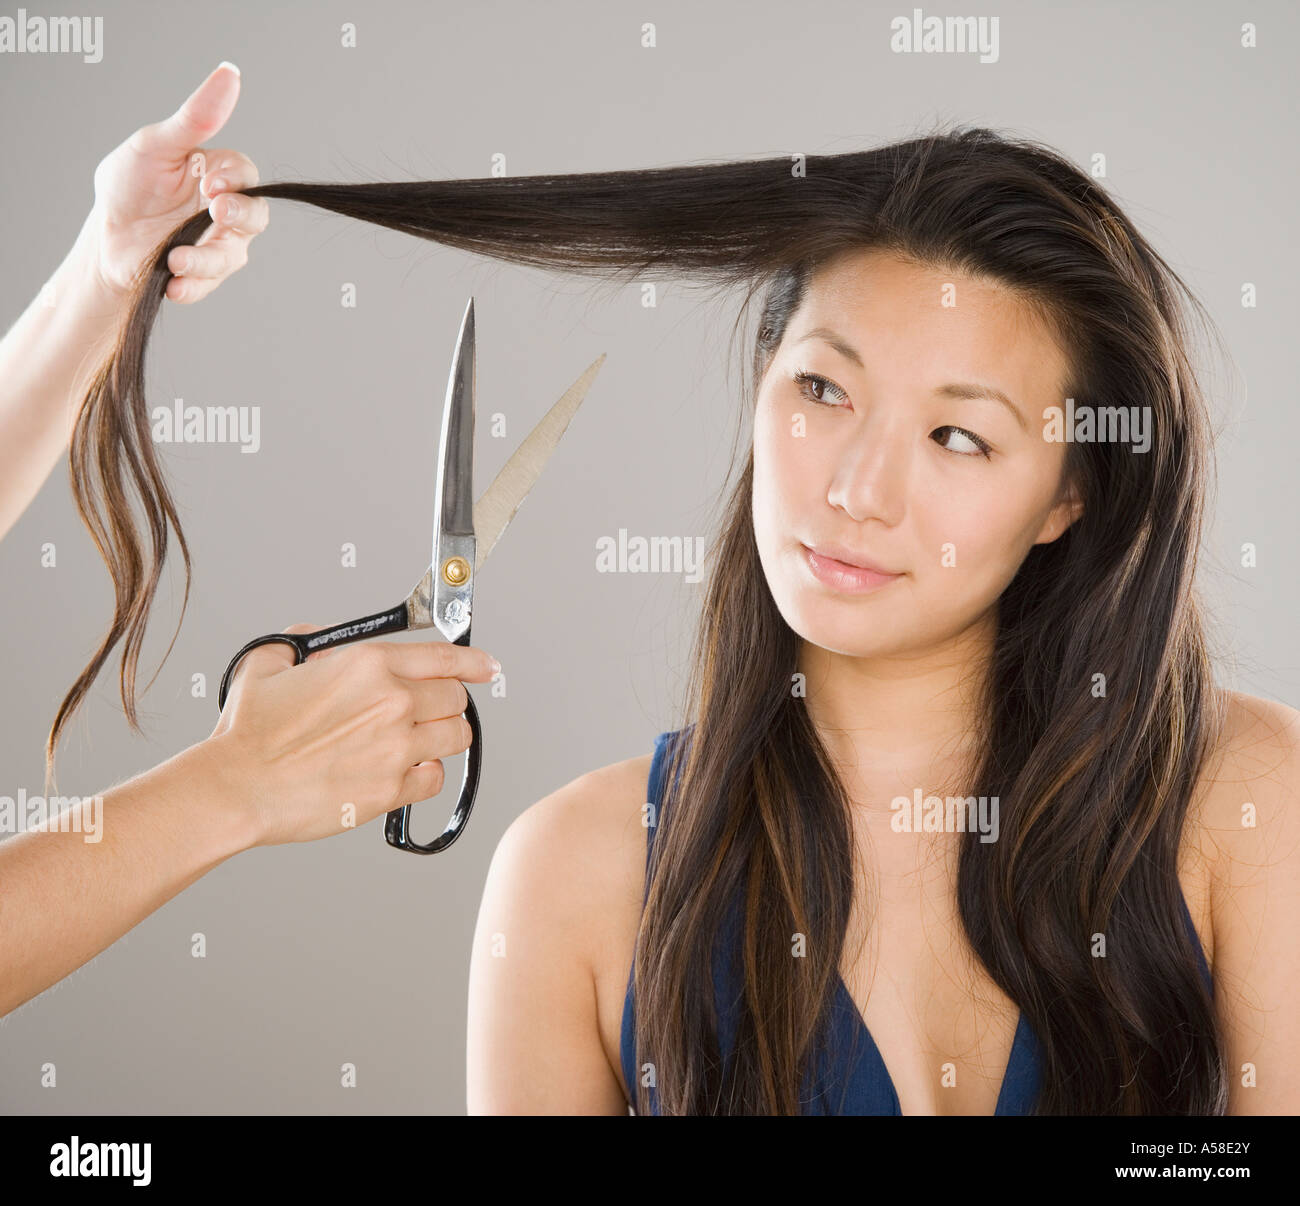 Person holding scissors next to piece of Asian woman s hair Stock Photo